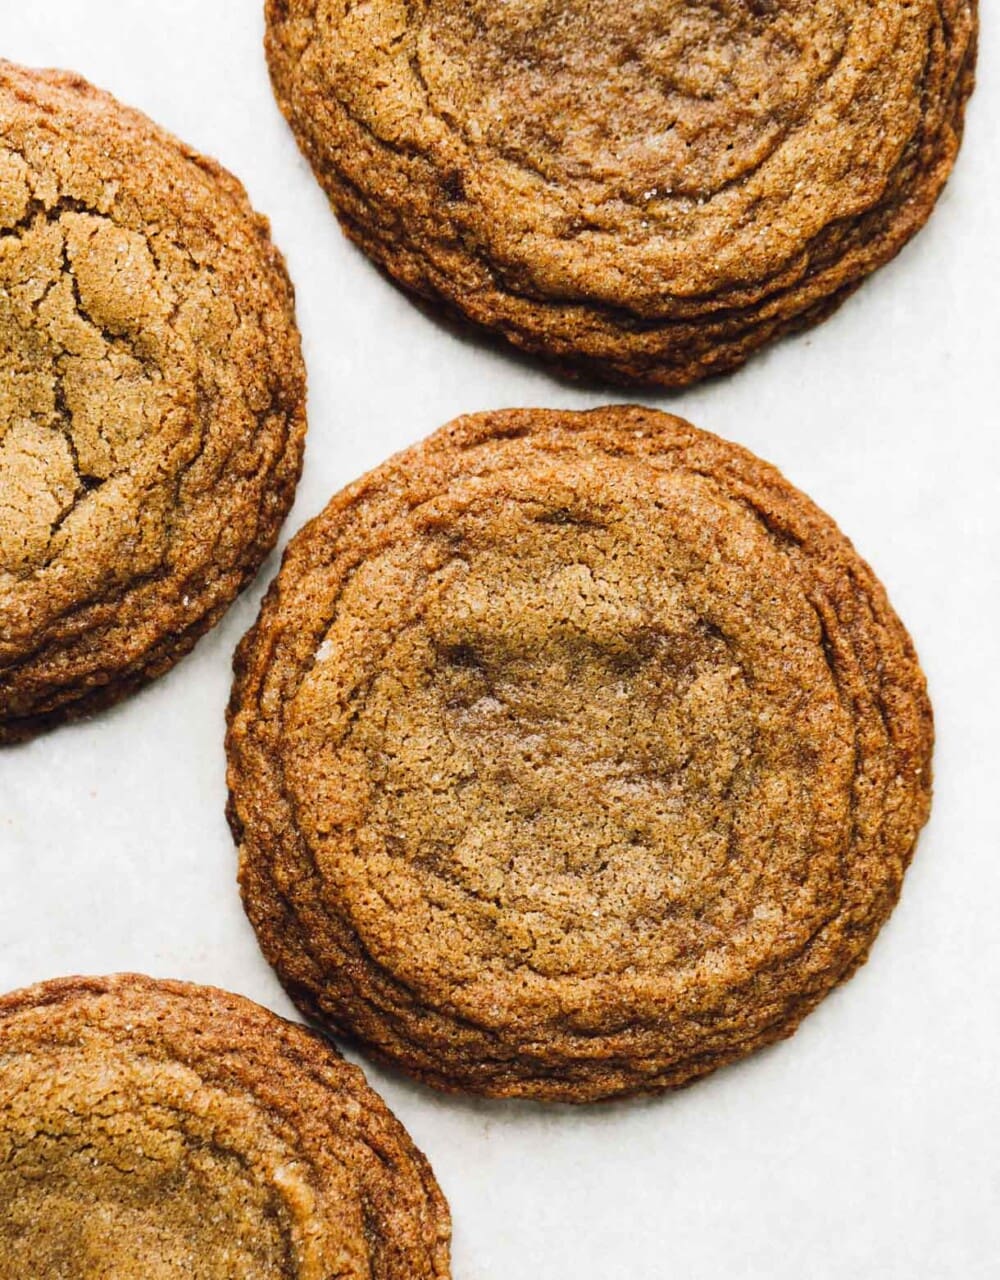 gluten-free ginger molasses cookies on white parchment paper